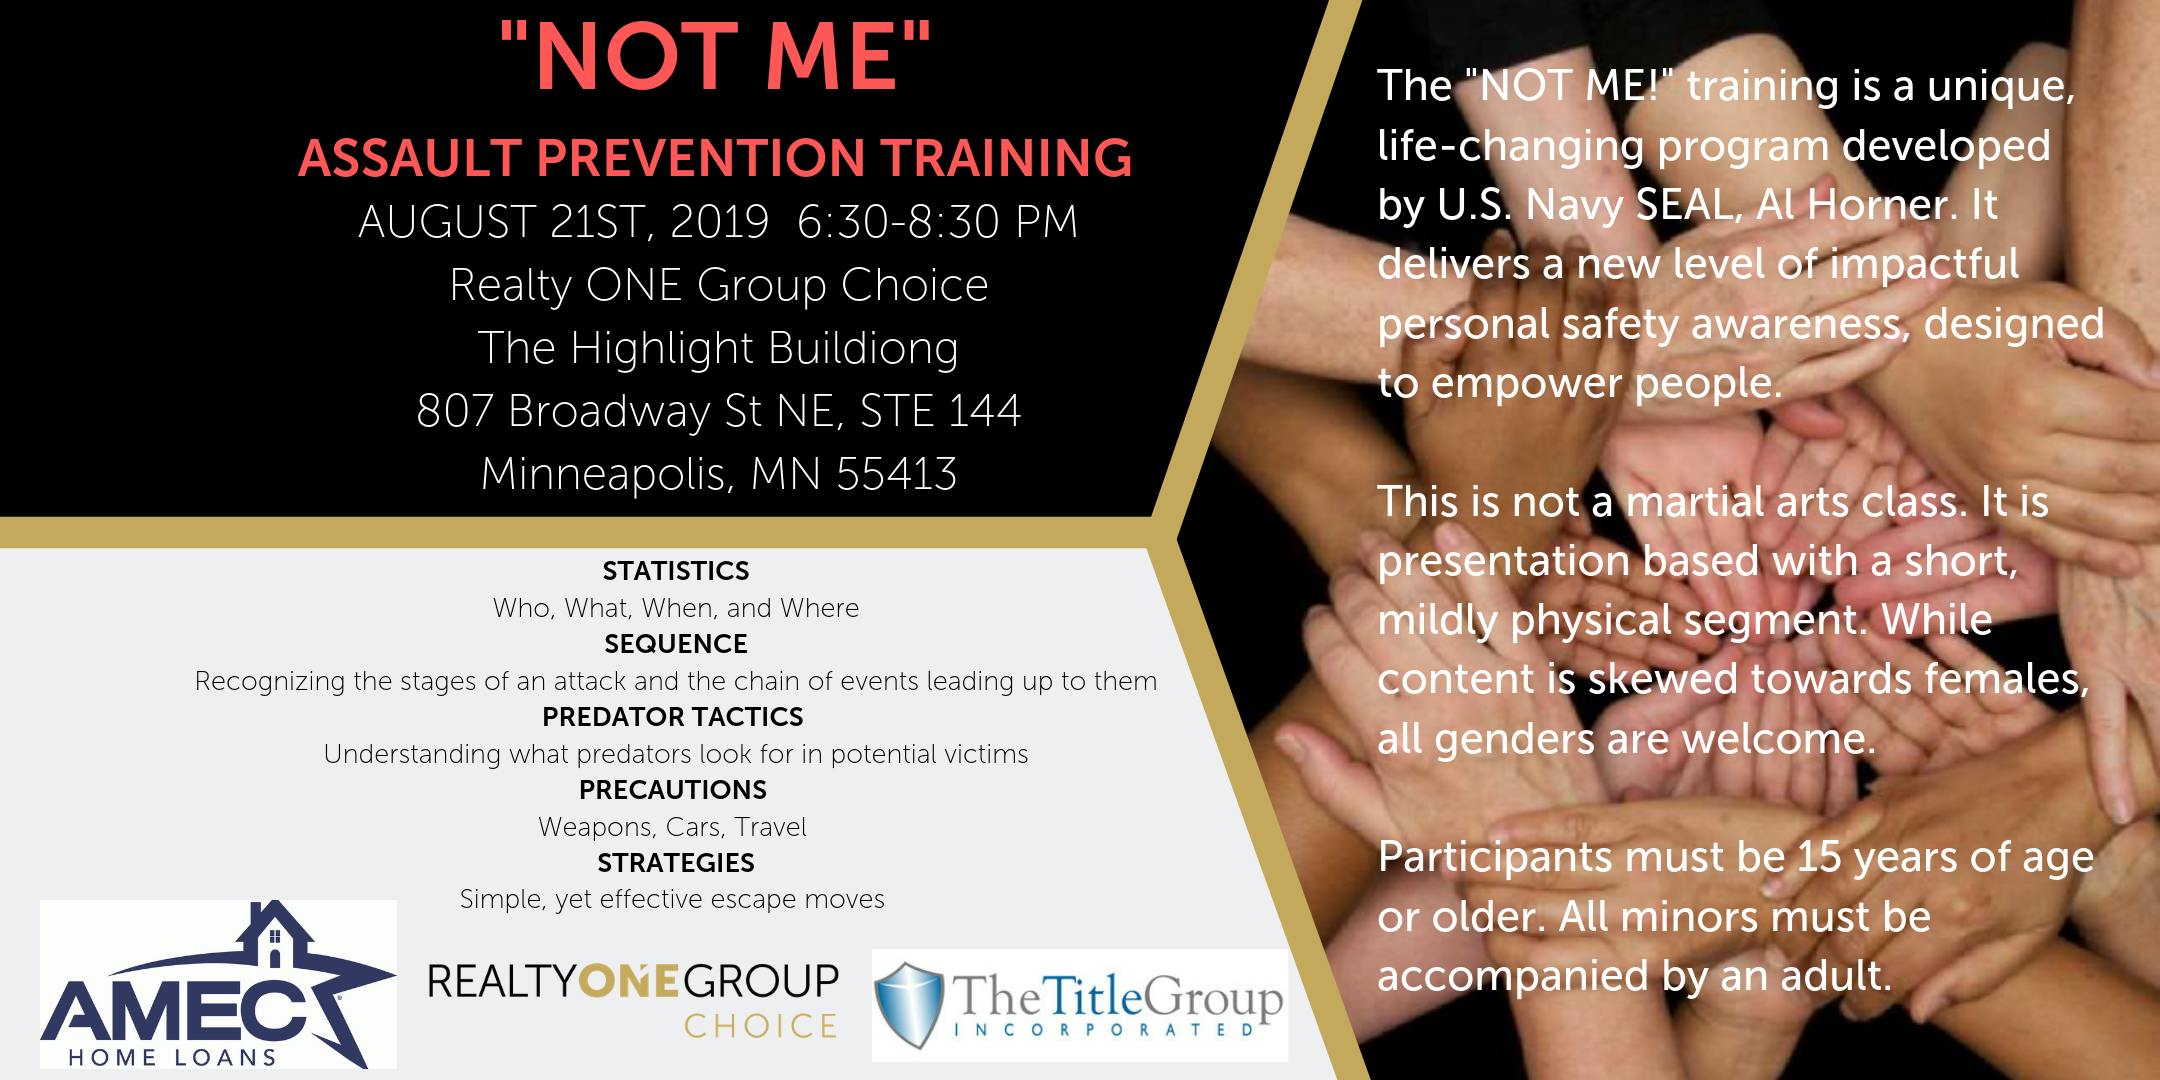 Attention all ladies!! NOT ME Assault Prevention Training